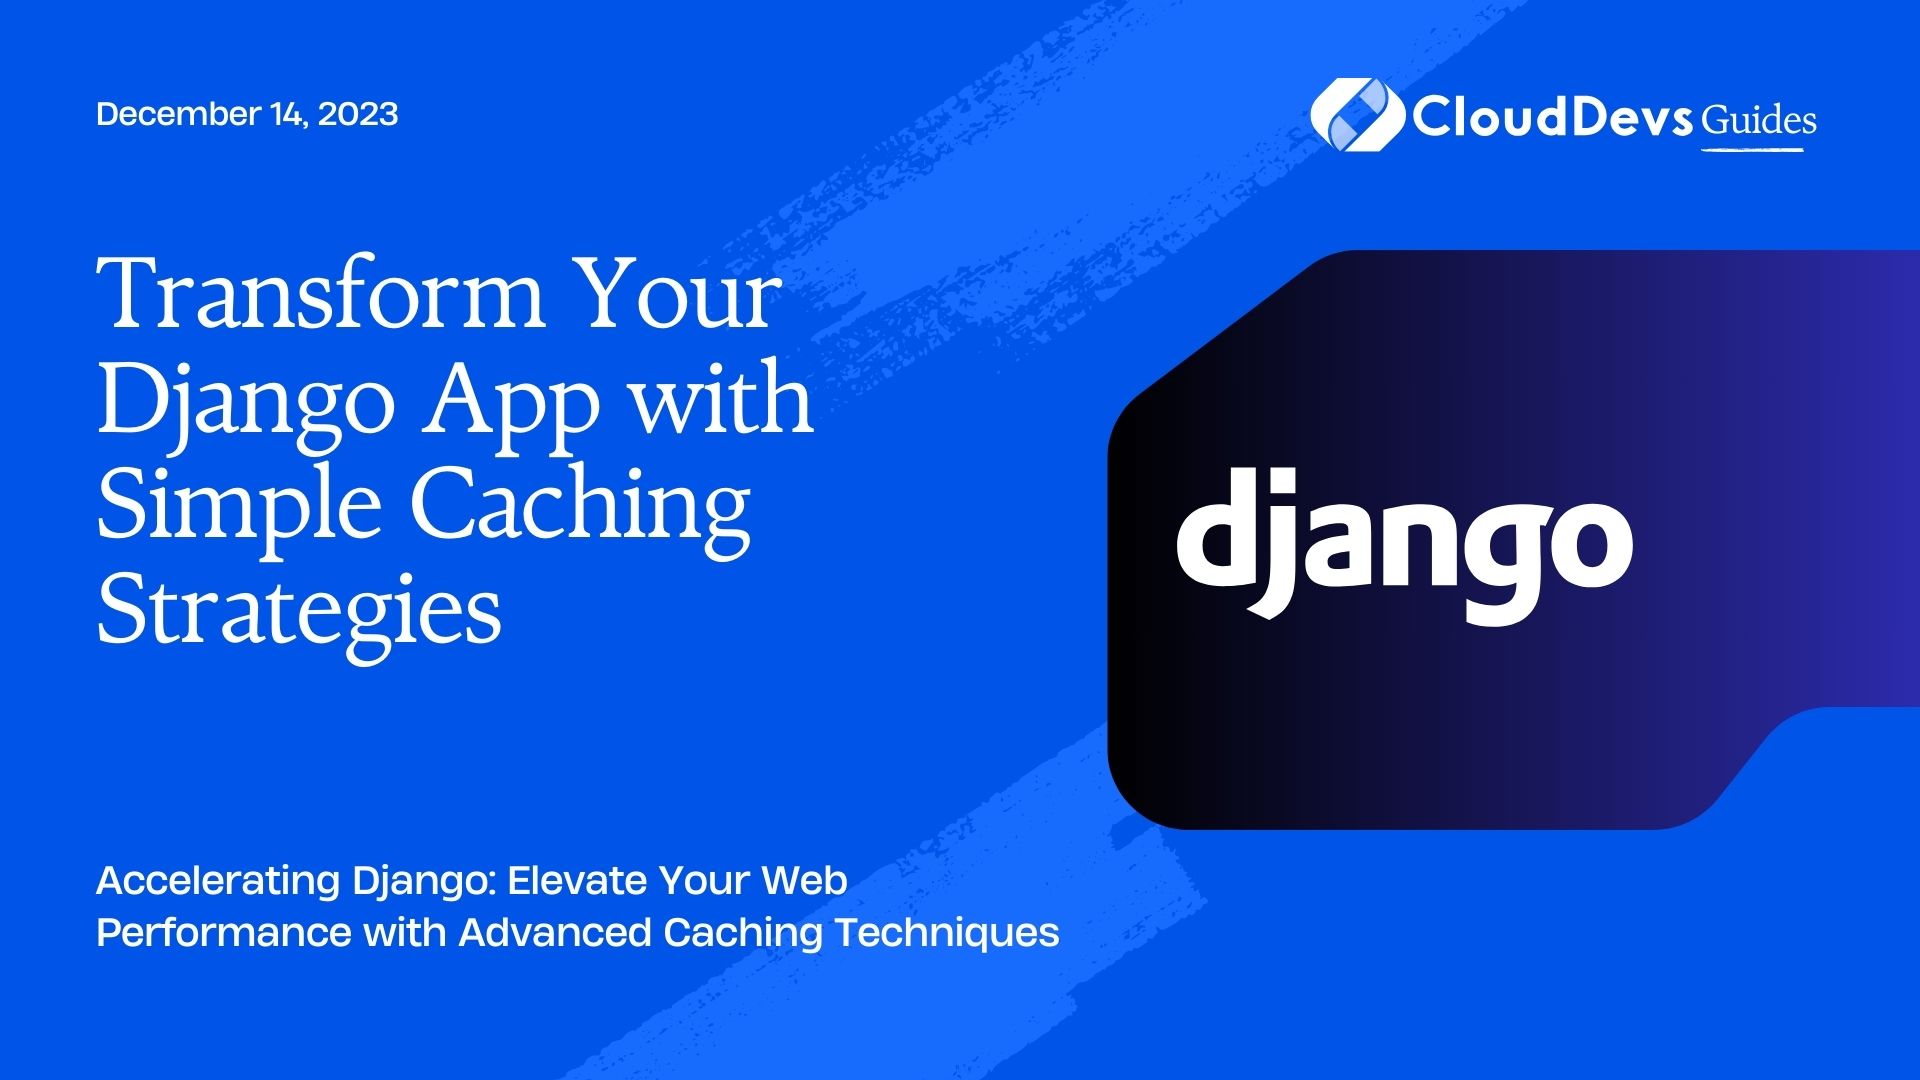 Transform Your Django App with Simple Caching Strategies